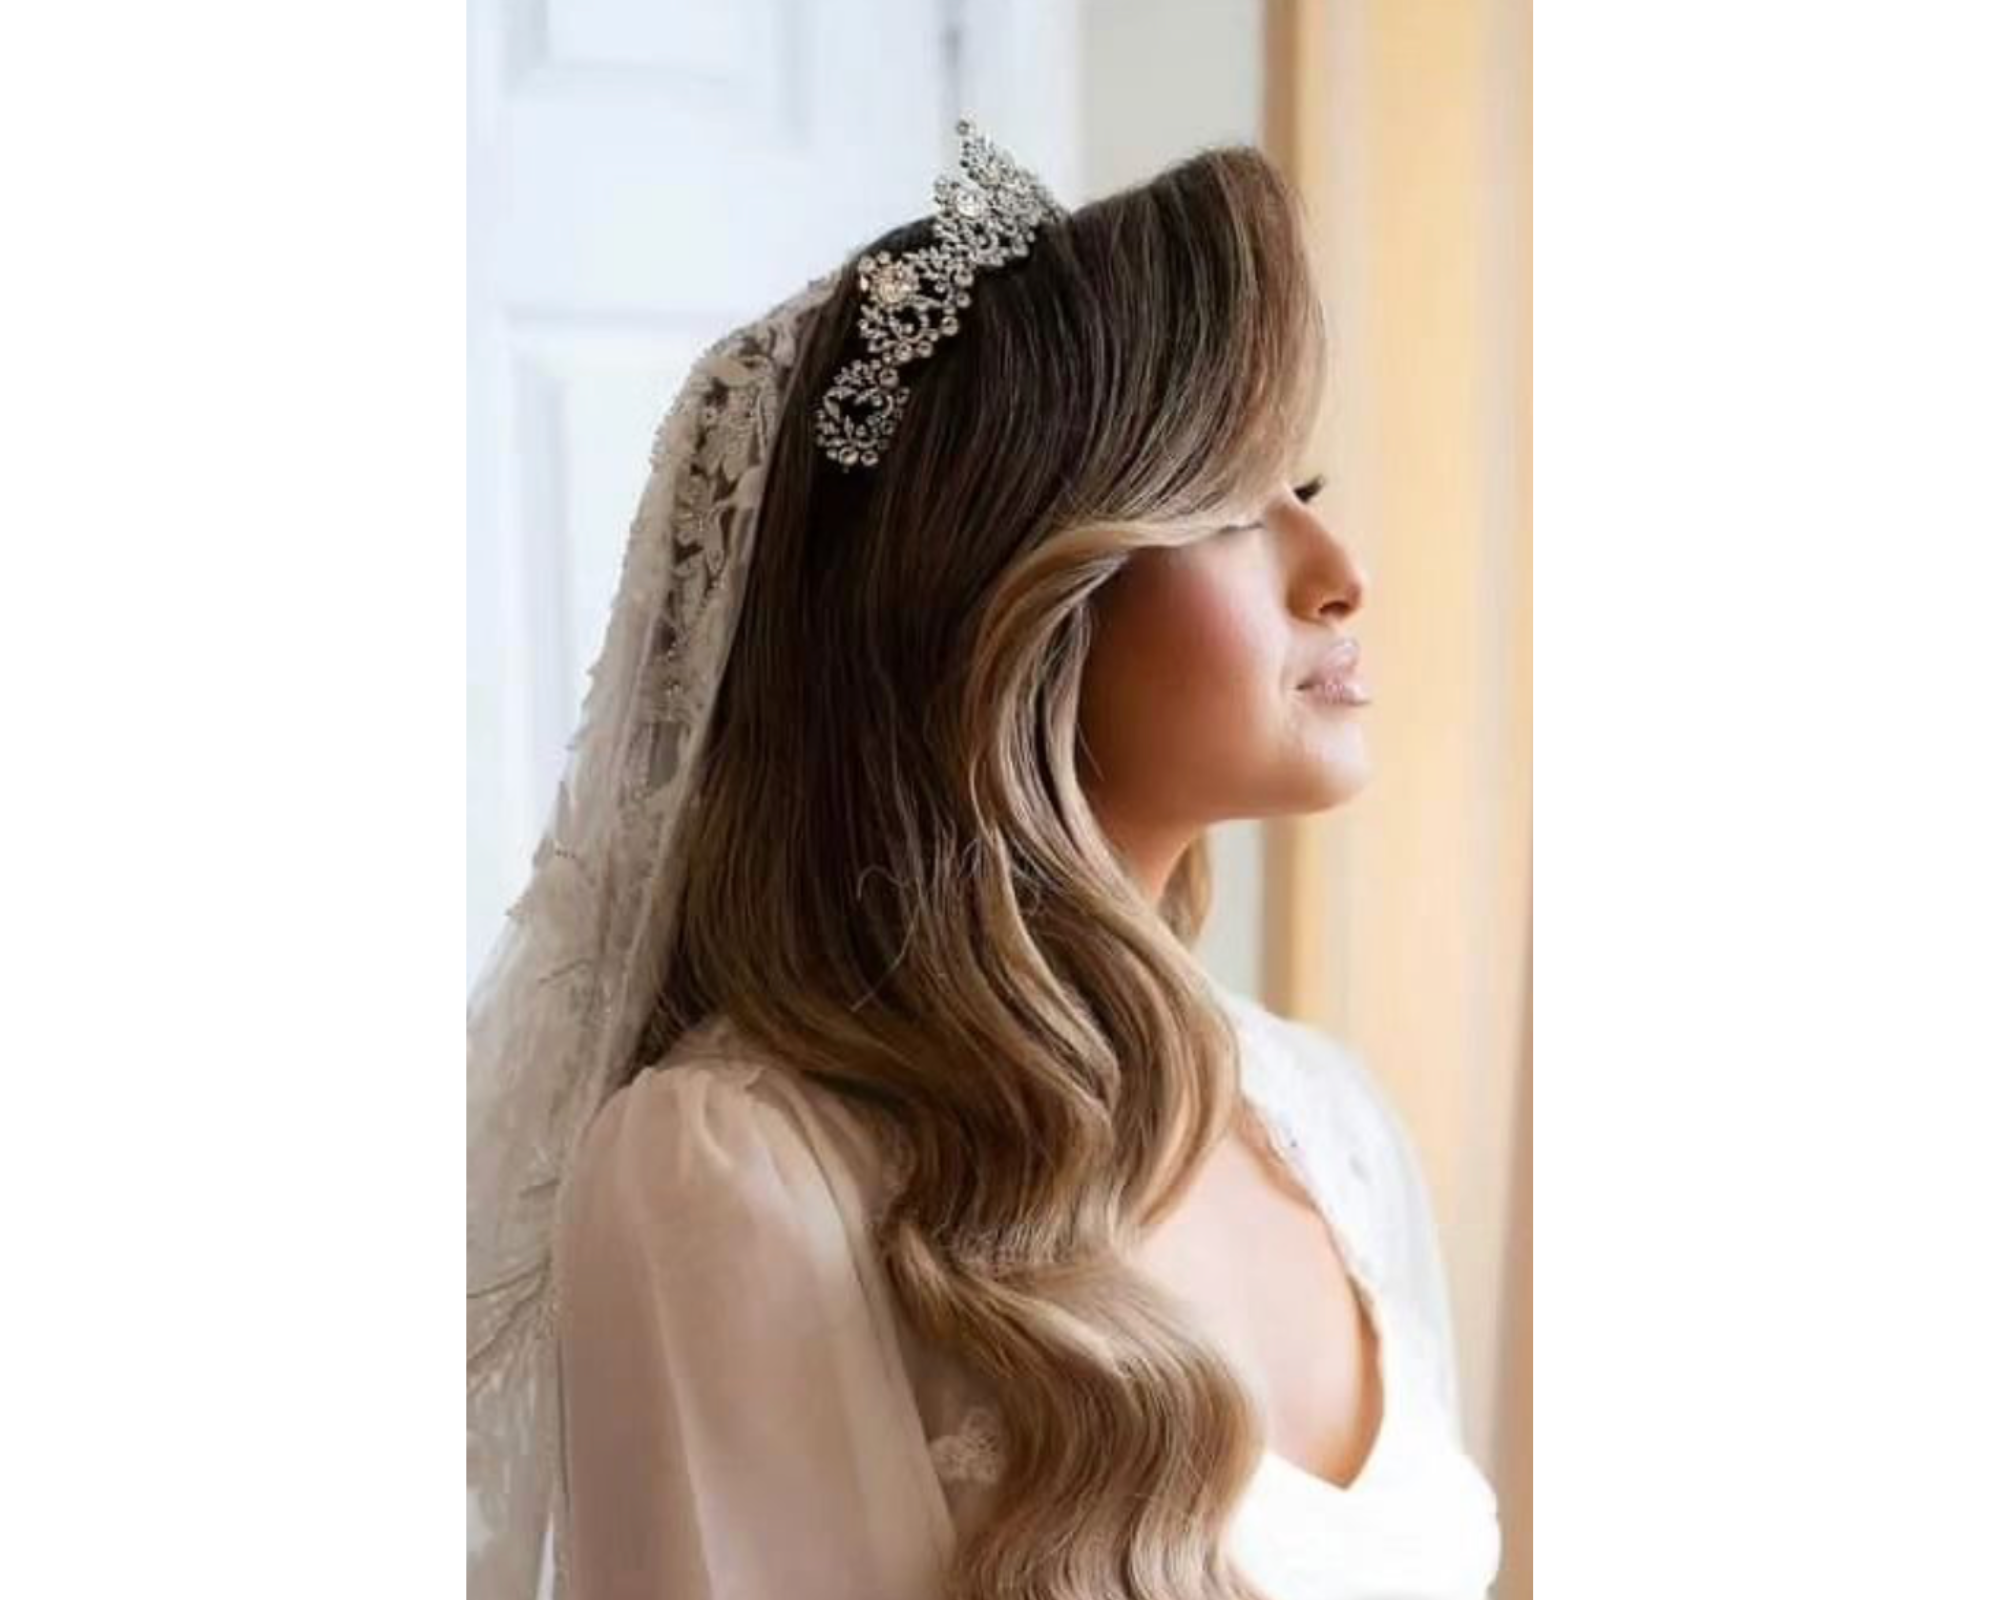 A lovely bride with her blond hair in soft waves wearing a veil and glittering Swarovski crystal bridal tiara.